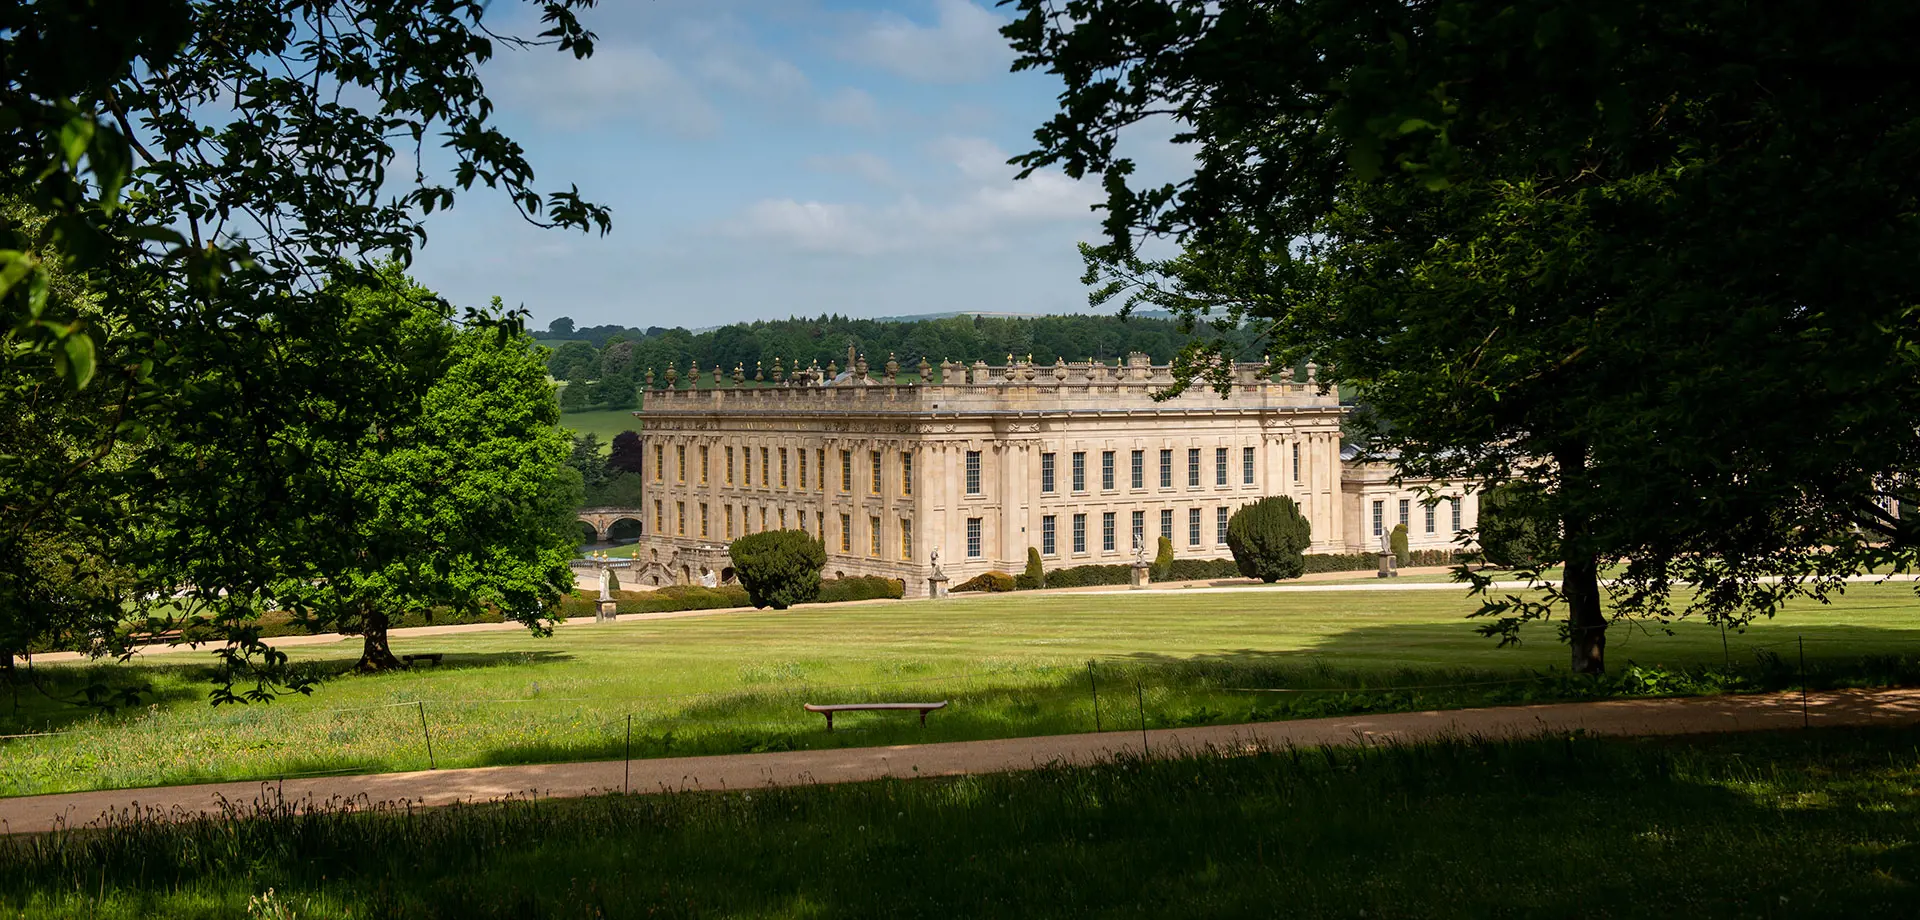 About Chatsworth